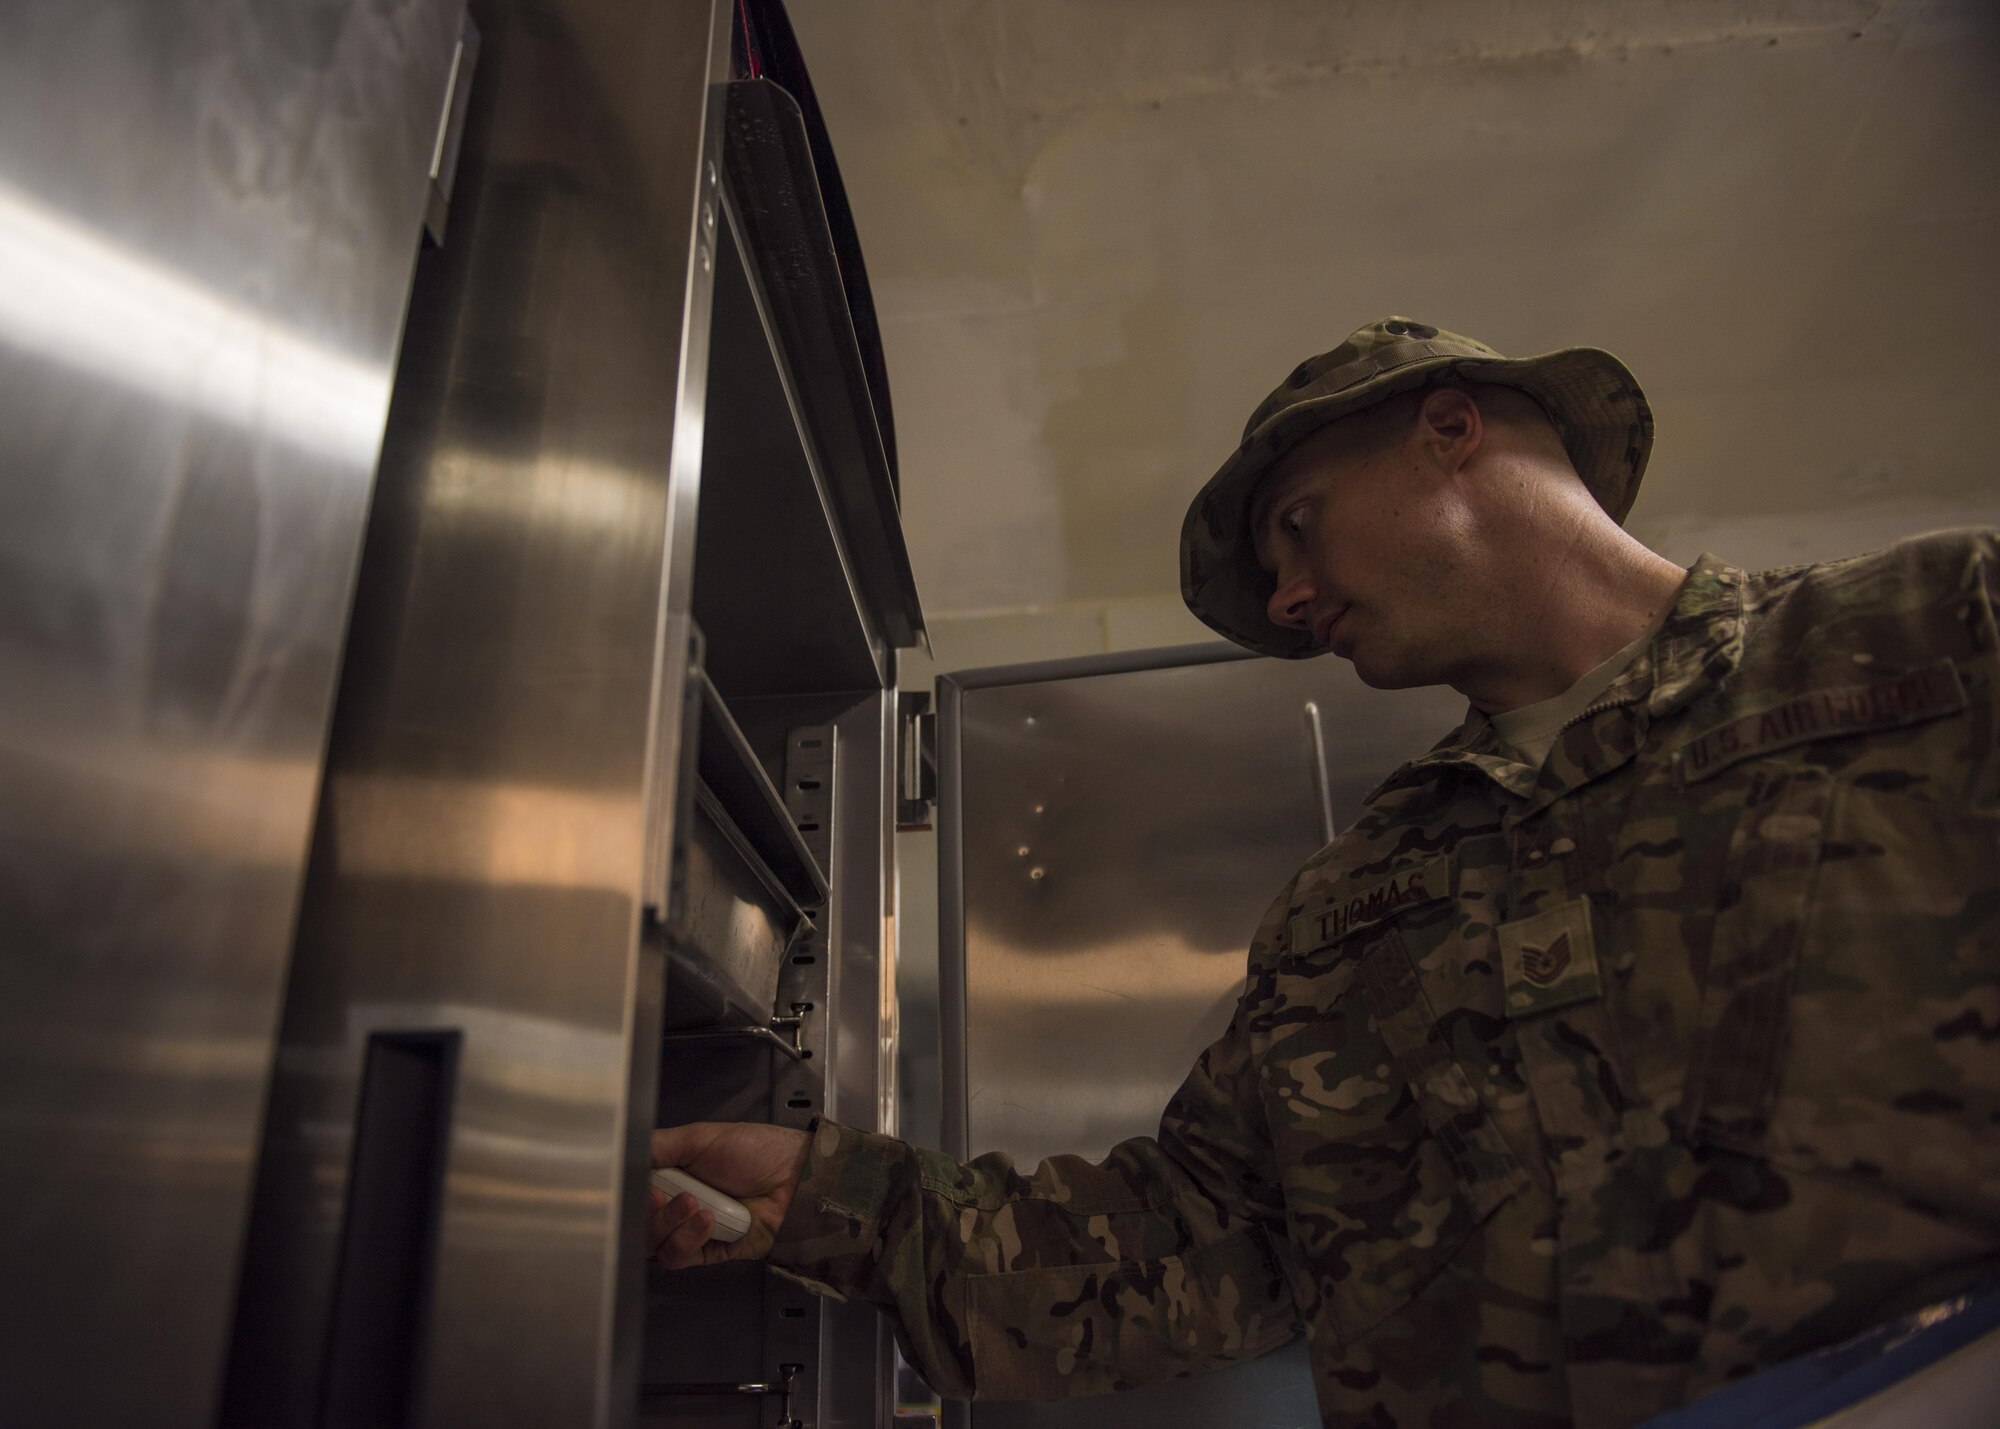 Tech Sgt. Rusty Thomas, 455th Expeditionary Medical Group public health technician, checks food temperature with an infrared thermometer, Bagram Airfield, Afghanistan, July 21, 2016. The infrared thermometer scans the outside temperature of the food to ensure it is served according to the health code standard. (U.S. Air Force photo by Senior Airman Justyn M. Freeman)